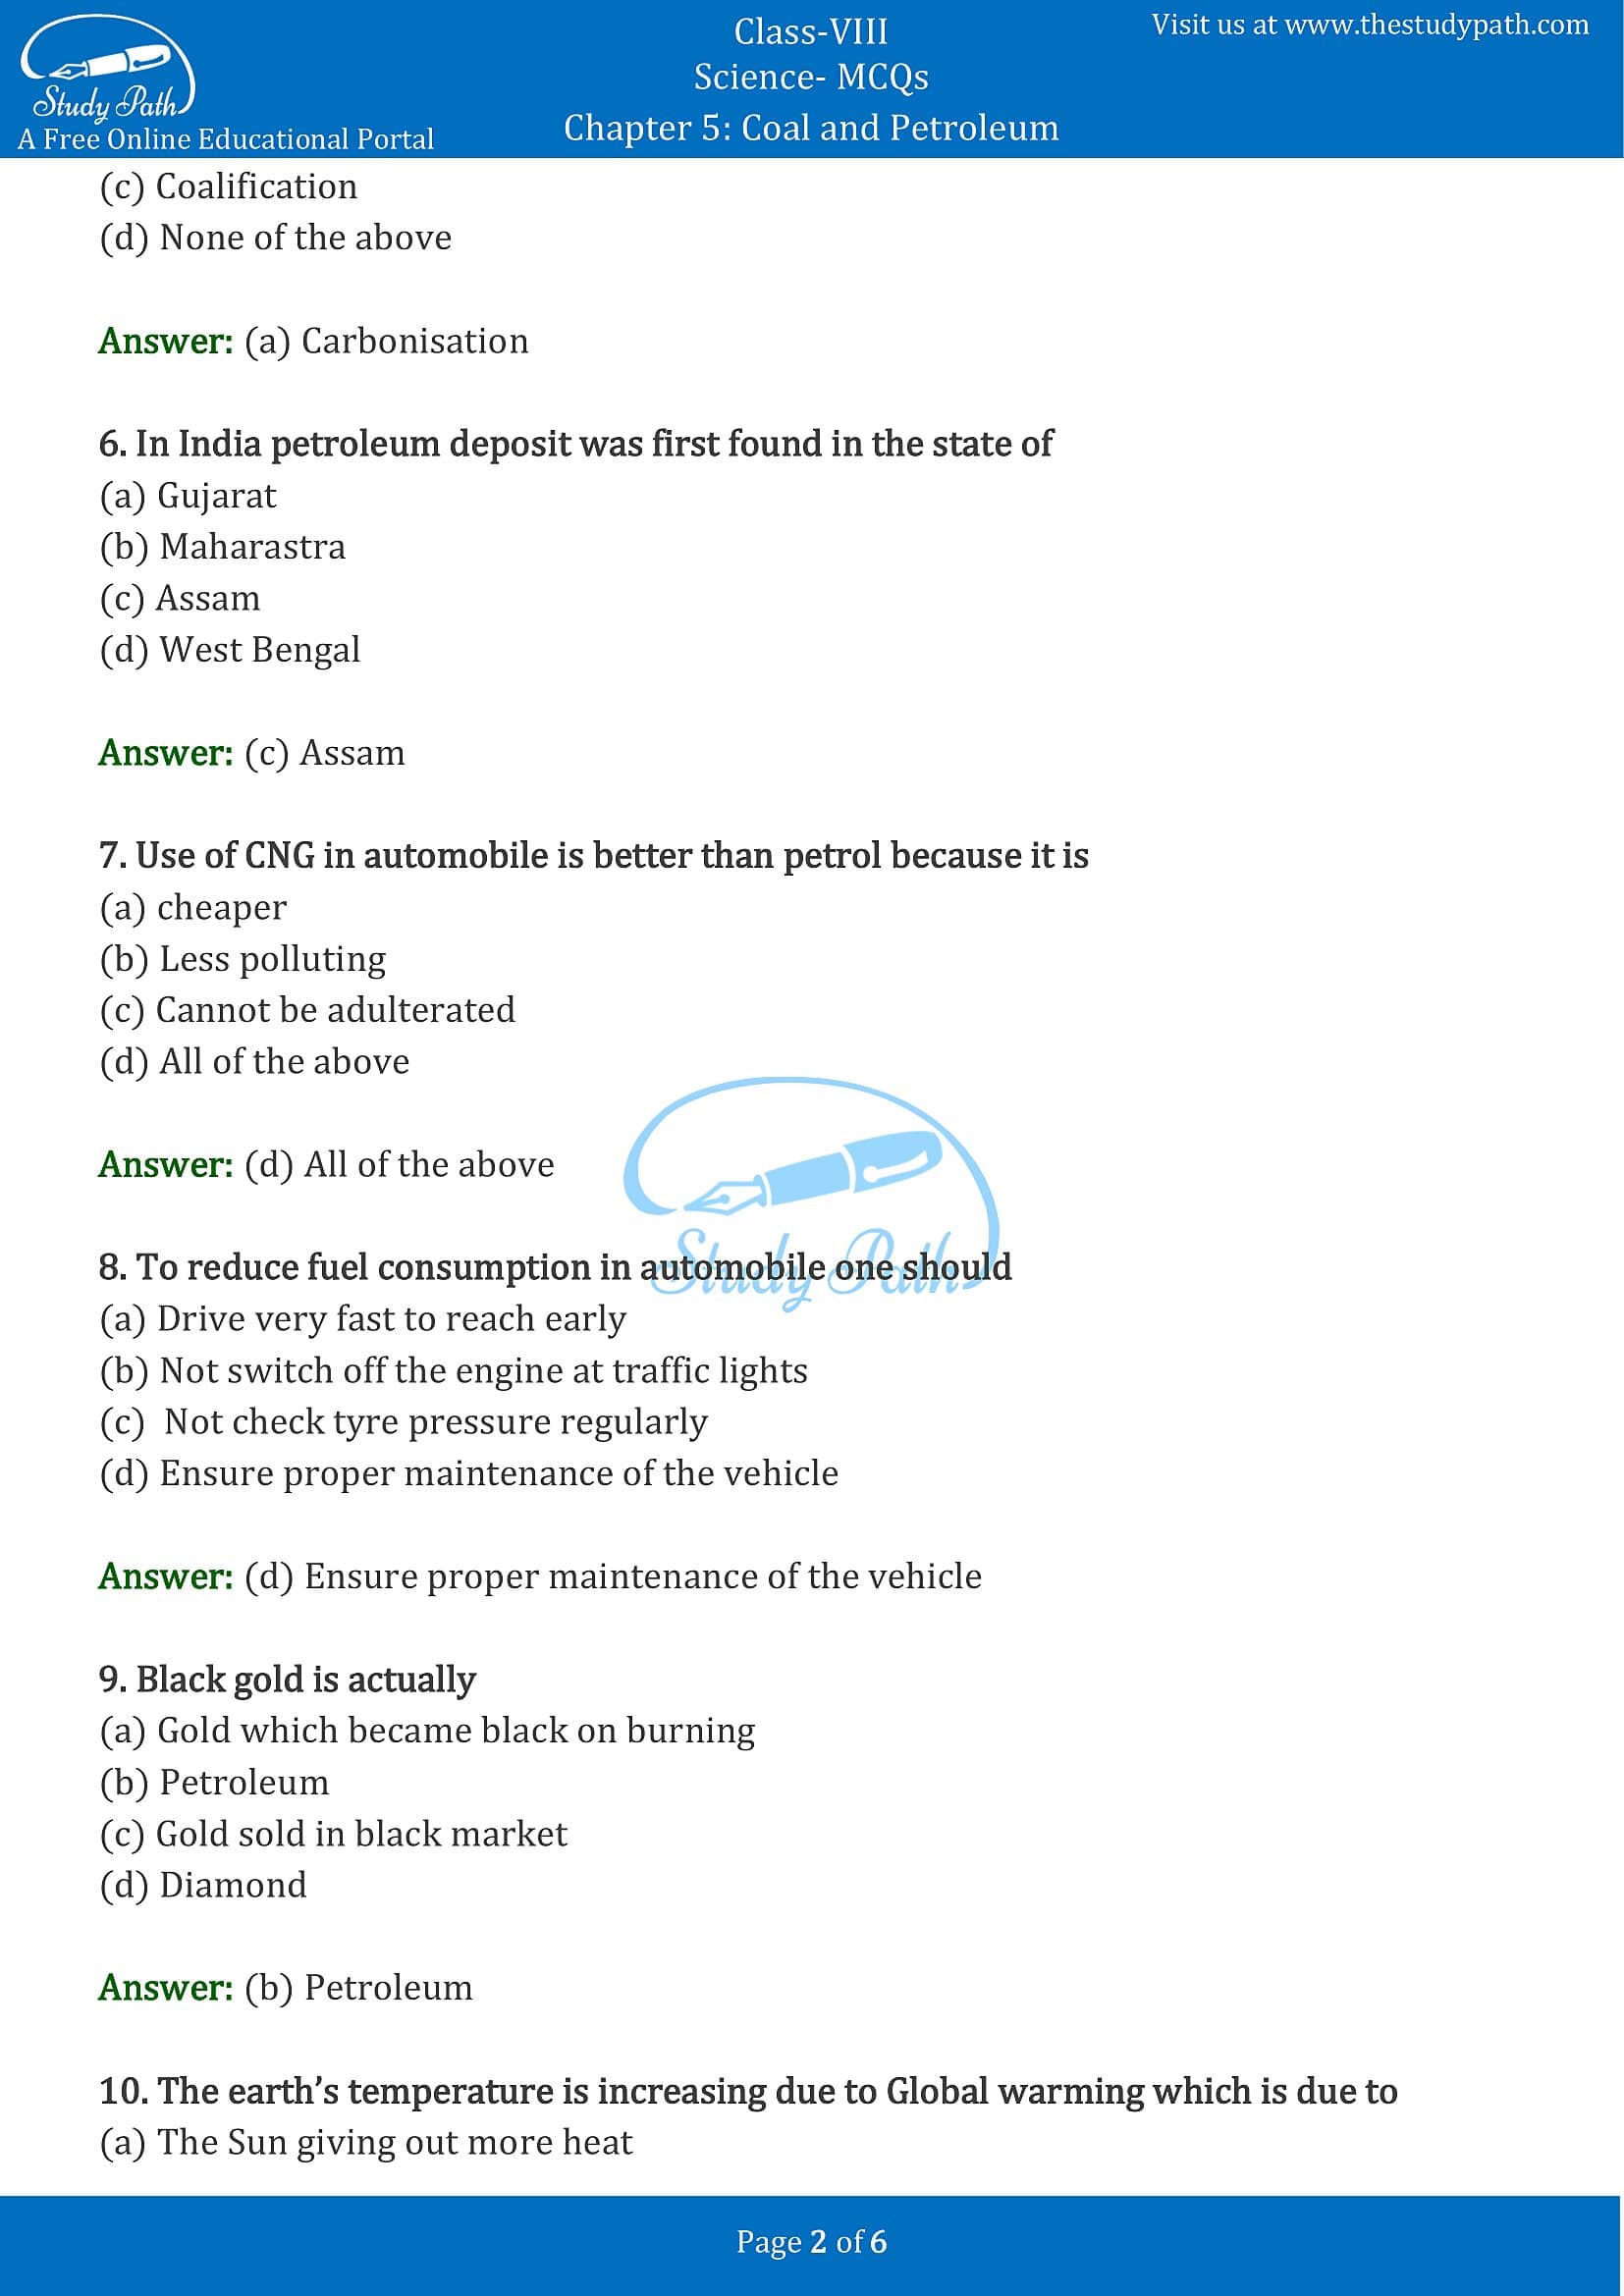 MCQ Questions for Class 8 Science Chapter 5 Coal and Petroleum with Answers PDF -2